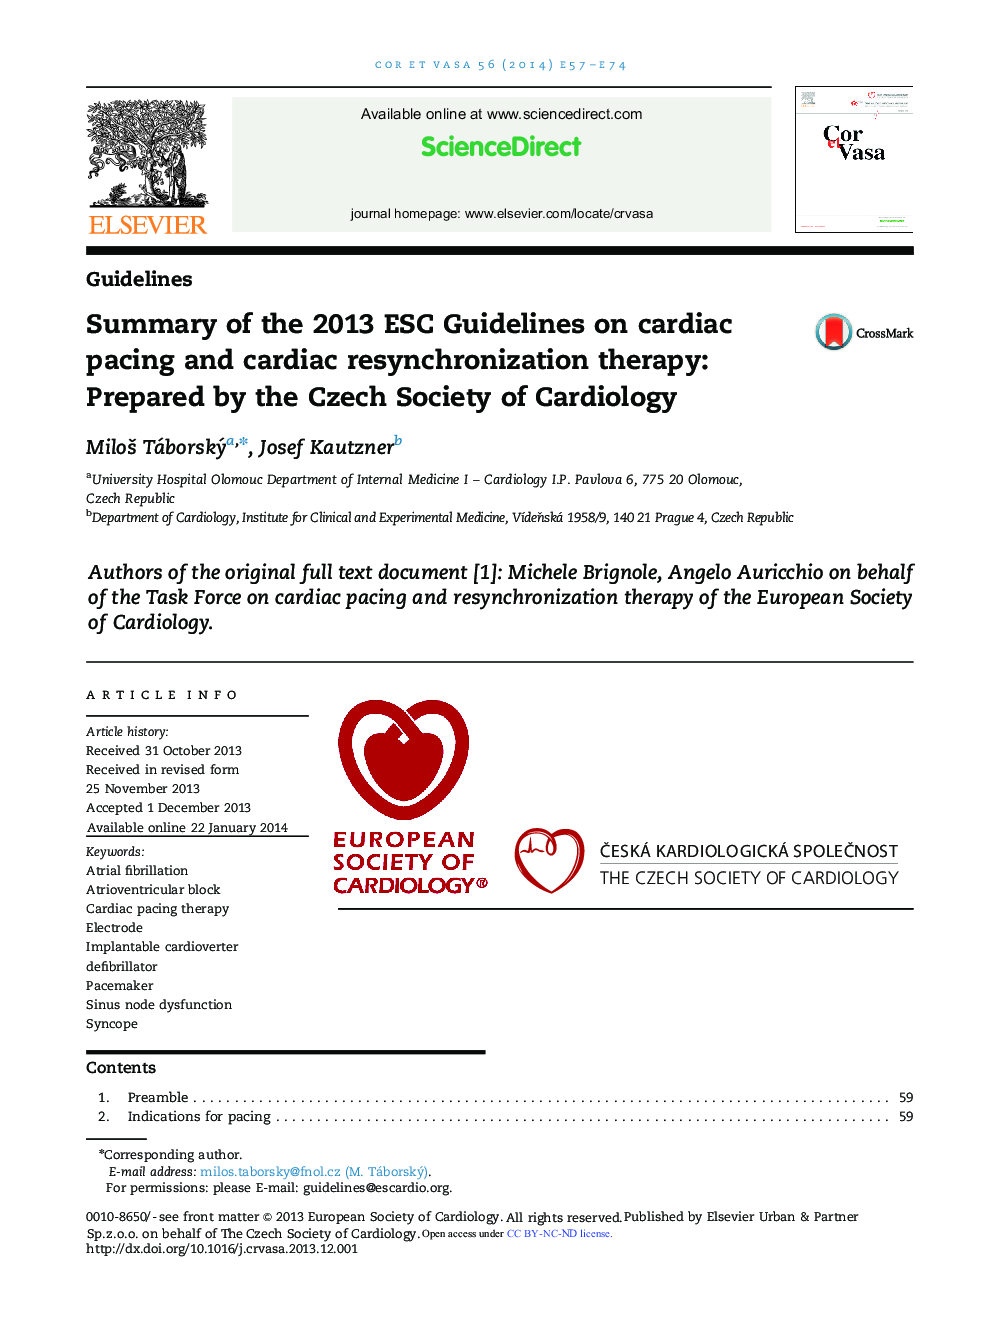 Summary of the 2013 ESC Guidelines on cardiac pacing and cardiac resynchronization therapy: Prepared by the Czech Society of Cardiology1